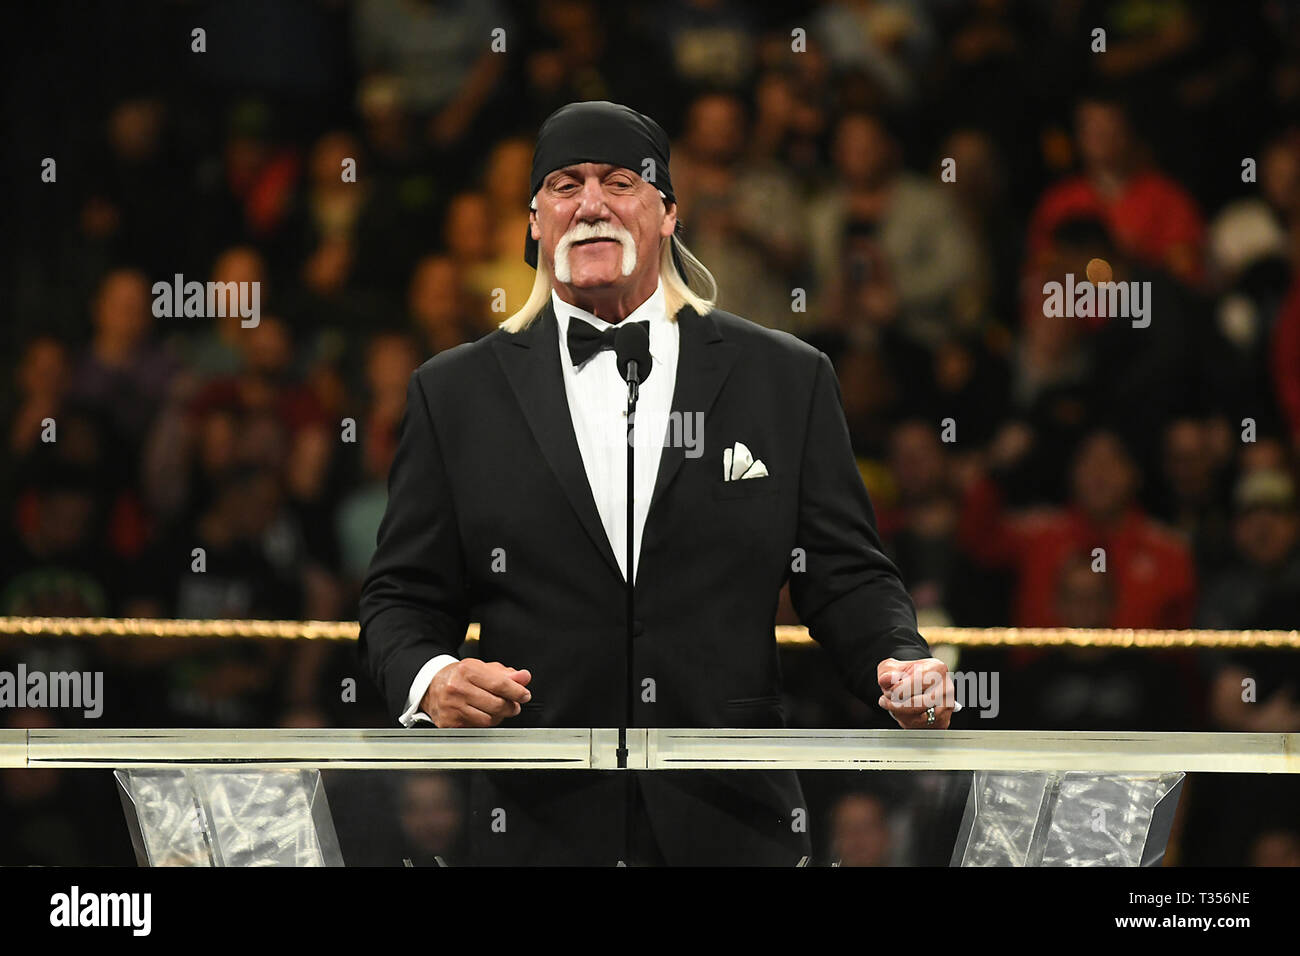 New York, USA. 6th Apr, 2019. Hulk Hogan at the 2019 WWE Hall Of Fame Ceremony at the Barclay's Center in Brooklyn, New York City on April 6, 2019. Credit: George Napolitano/Media Punch/Alamy Live News Stock Photo